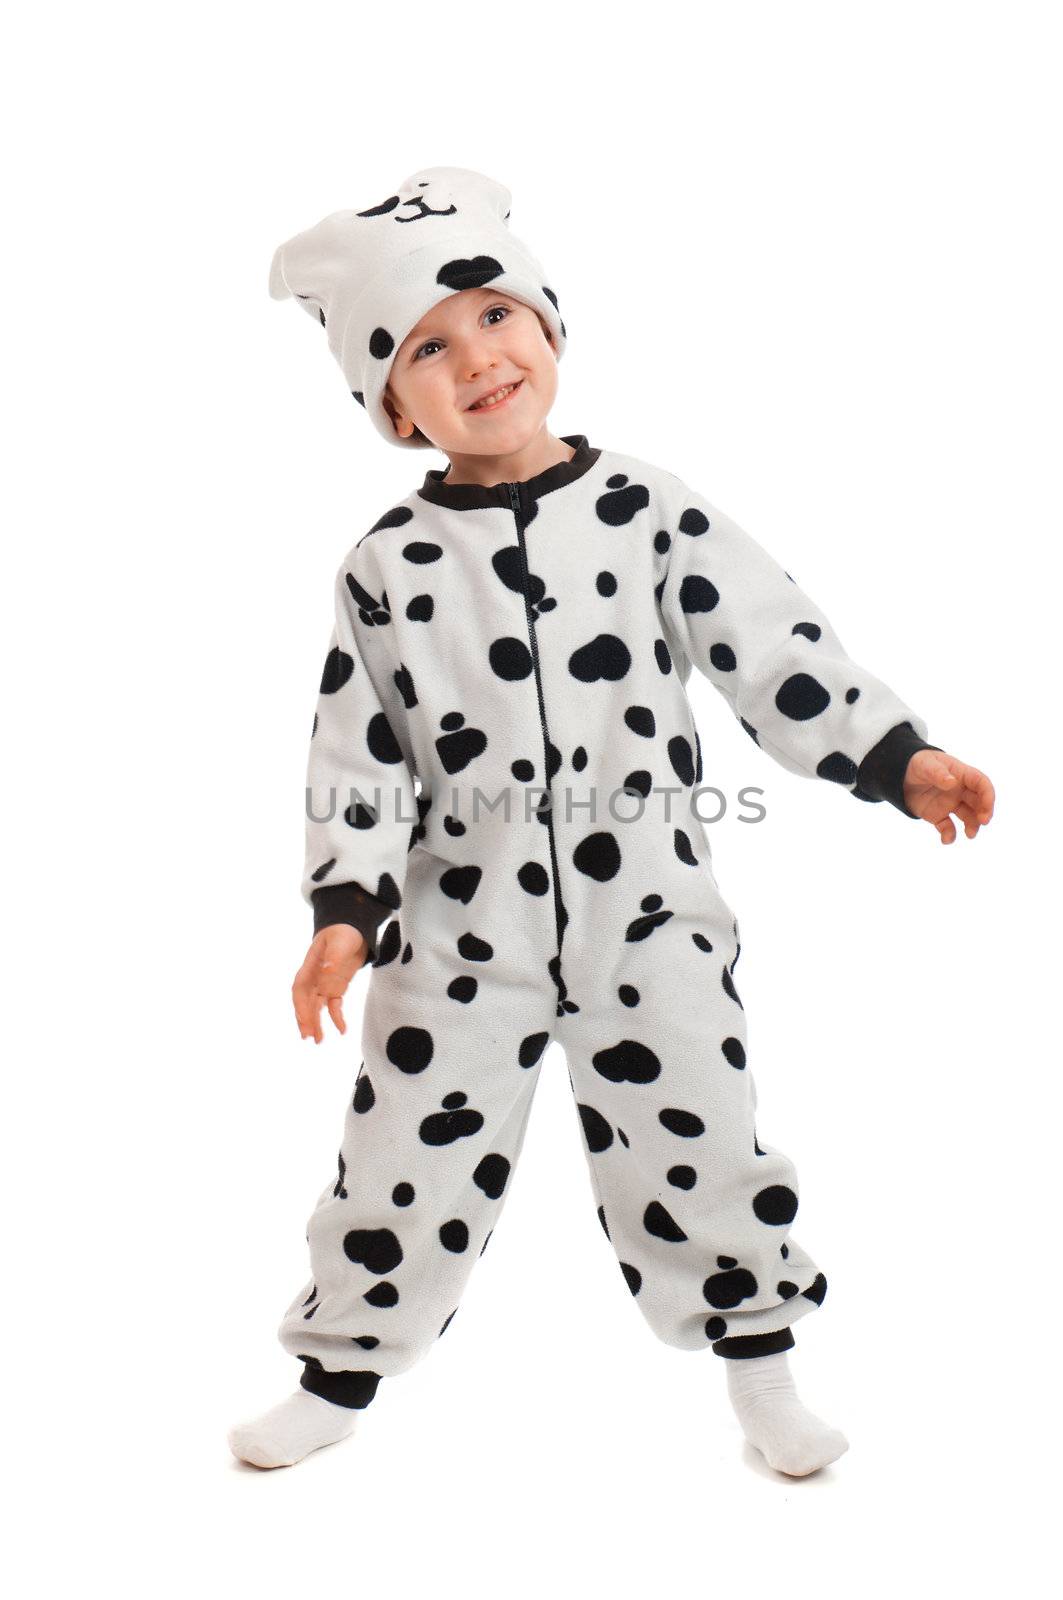 Little boy   dressed in a Dalmatian  suit.Plum Pudding Dog